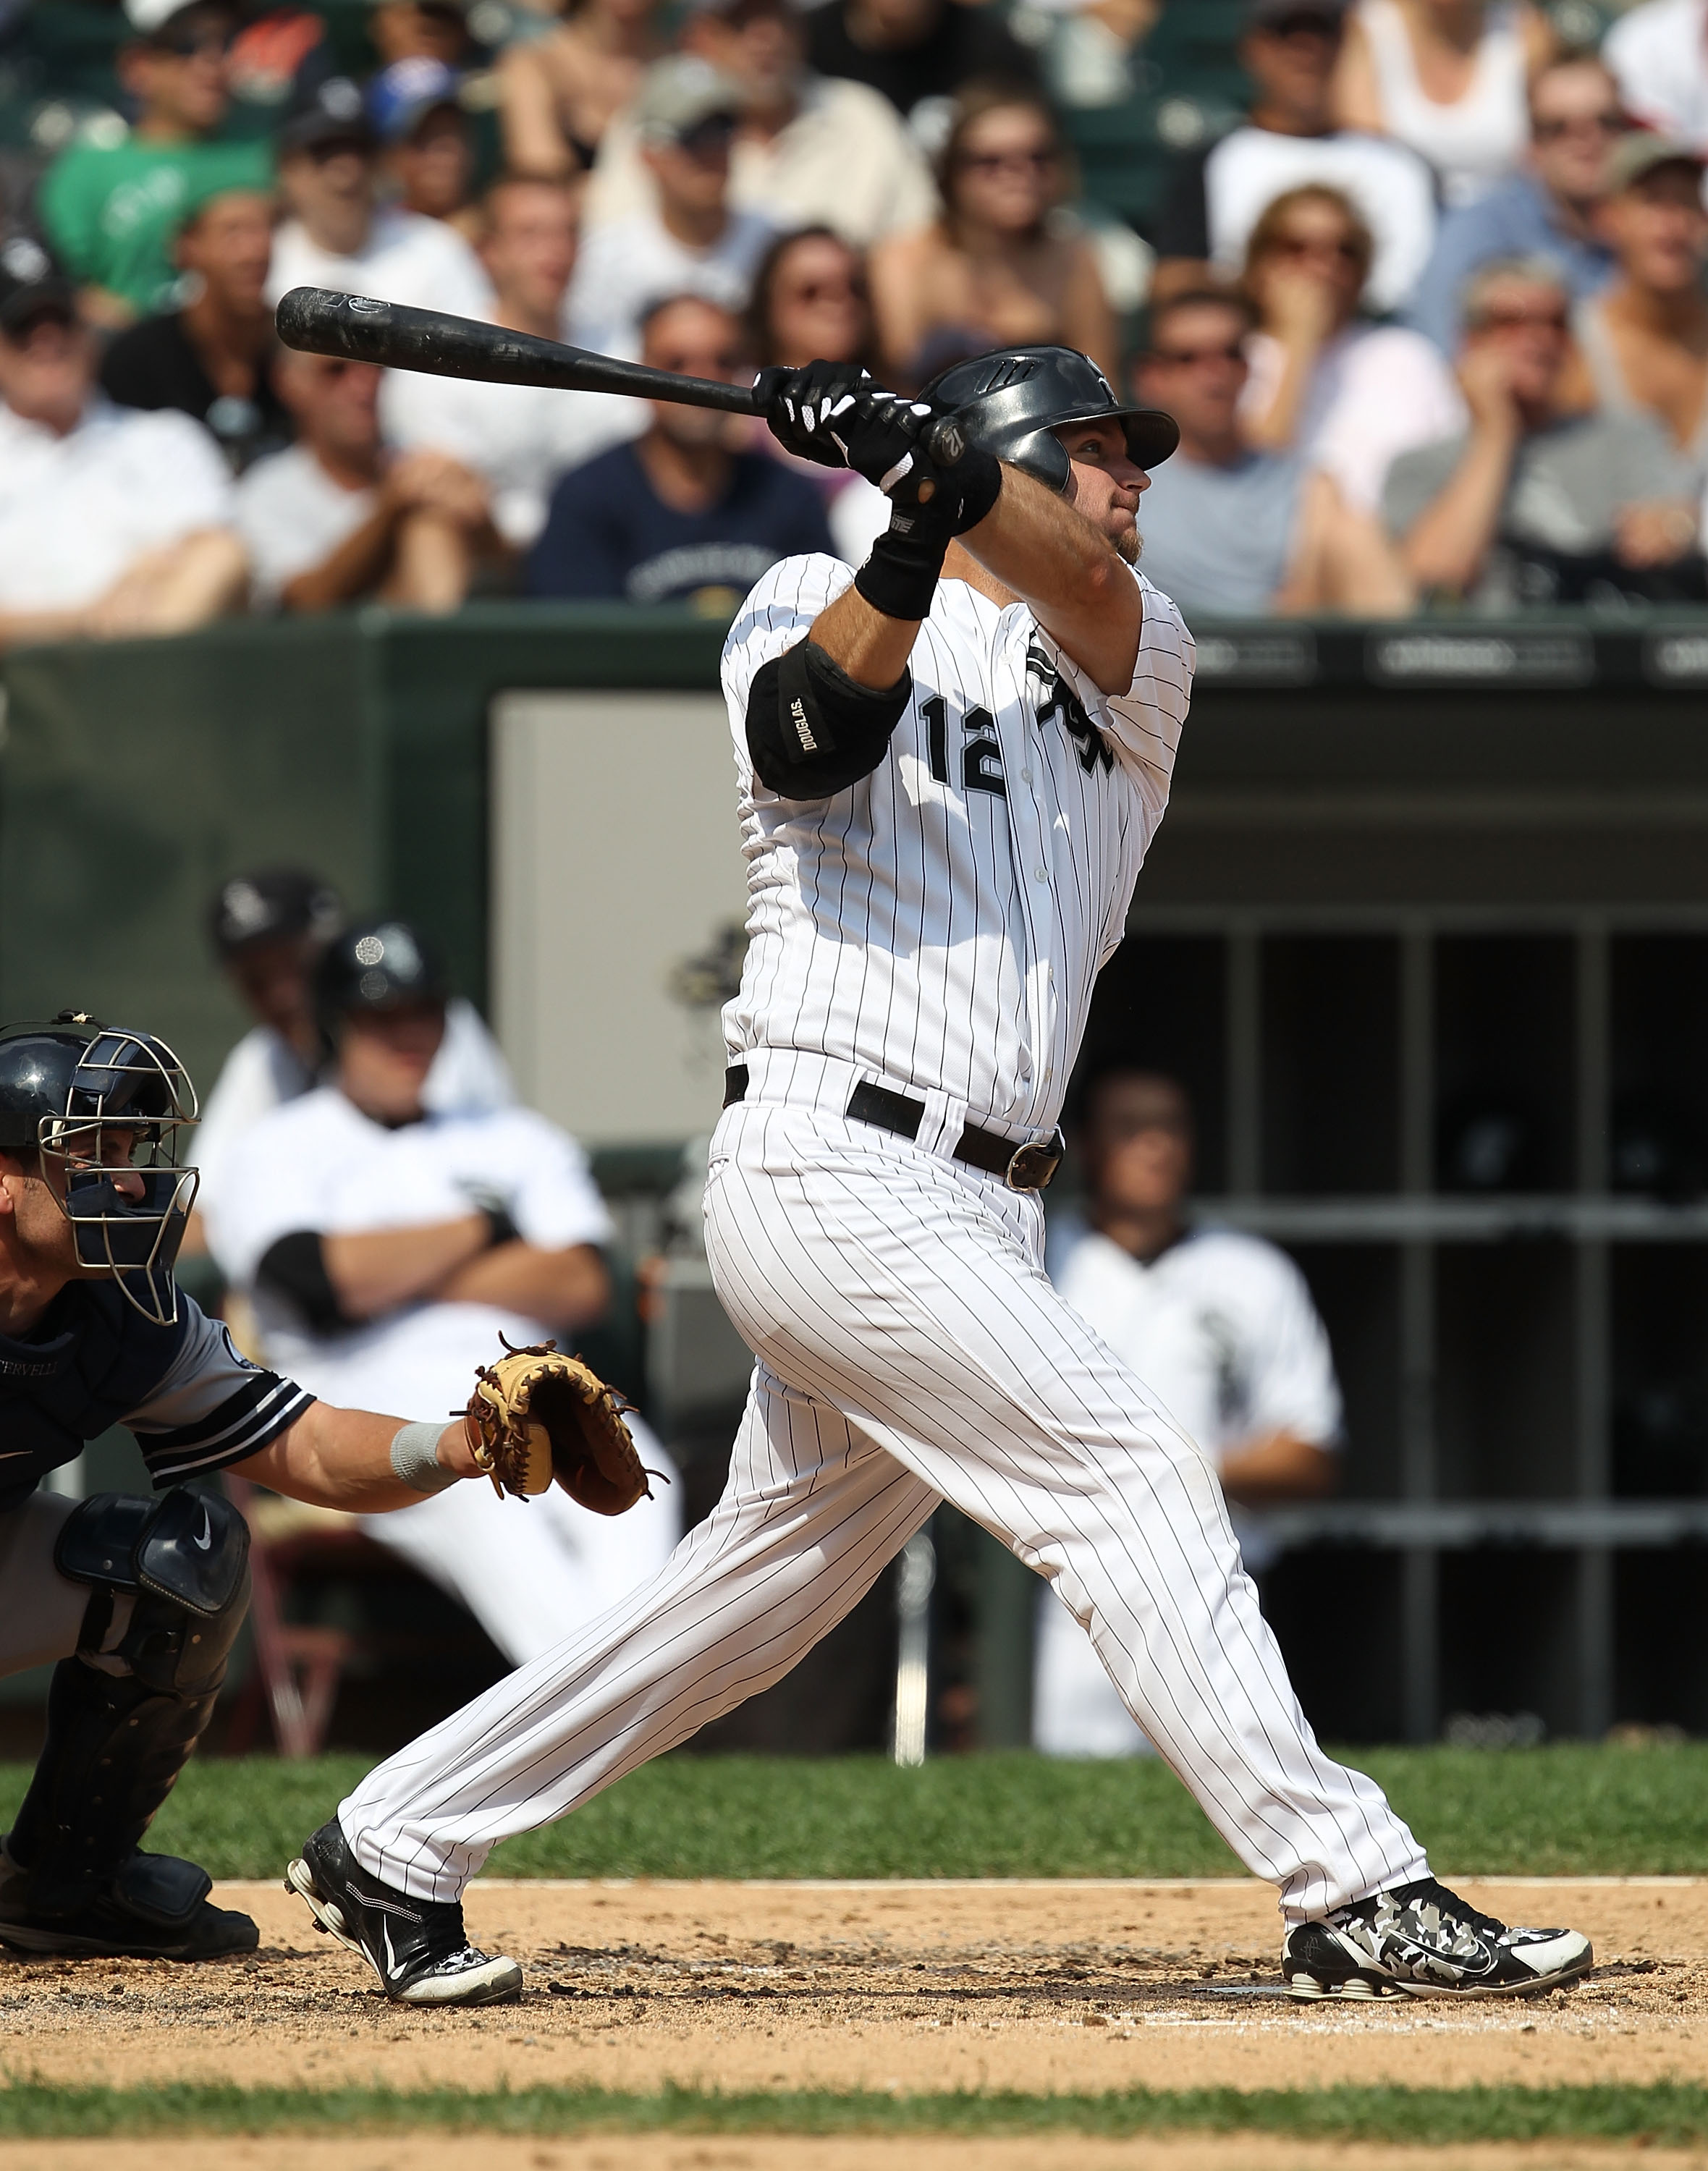 CHICAGO - AUGUST 29: A.J. Pierzynski #12 of the Chicago White Sox hits the ball against the New York Yankees at U.S. Cellular Field on August 29, 2010 in Chicago, Illinois. The Yankees defeated the White Sox 2-1. (Photo by Jonathan Daniel/Getty Images)